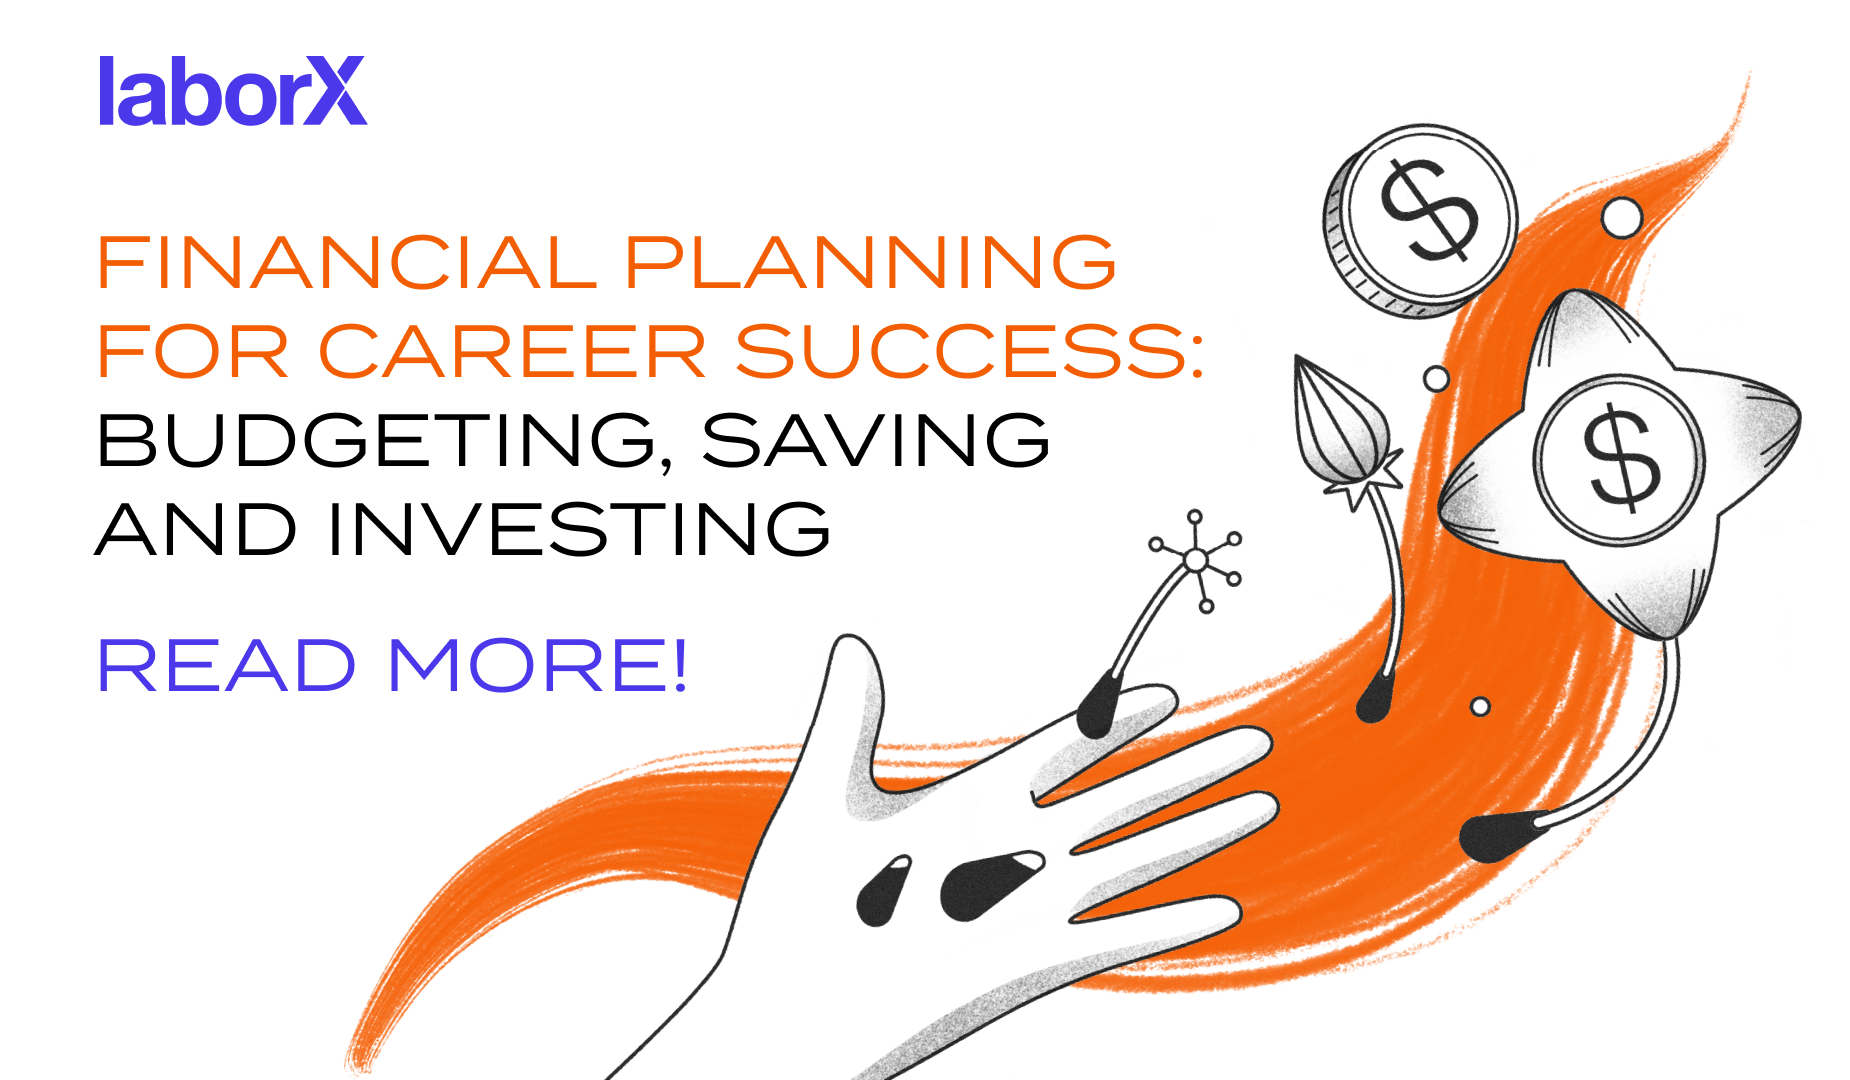 Financial Planning For Career Success: Budgeting, Saving And Investing